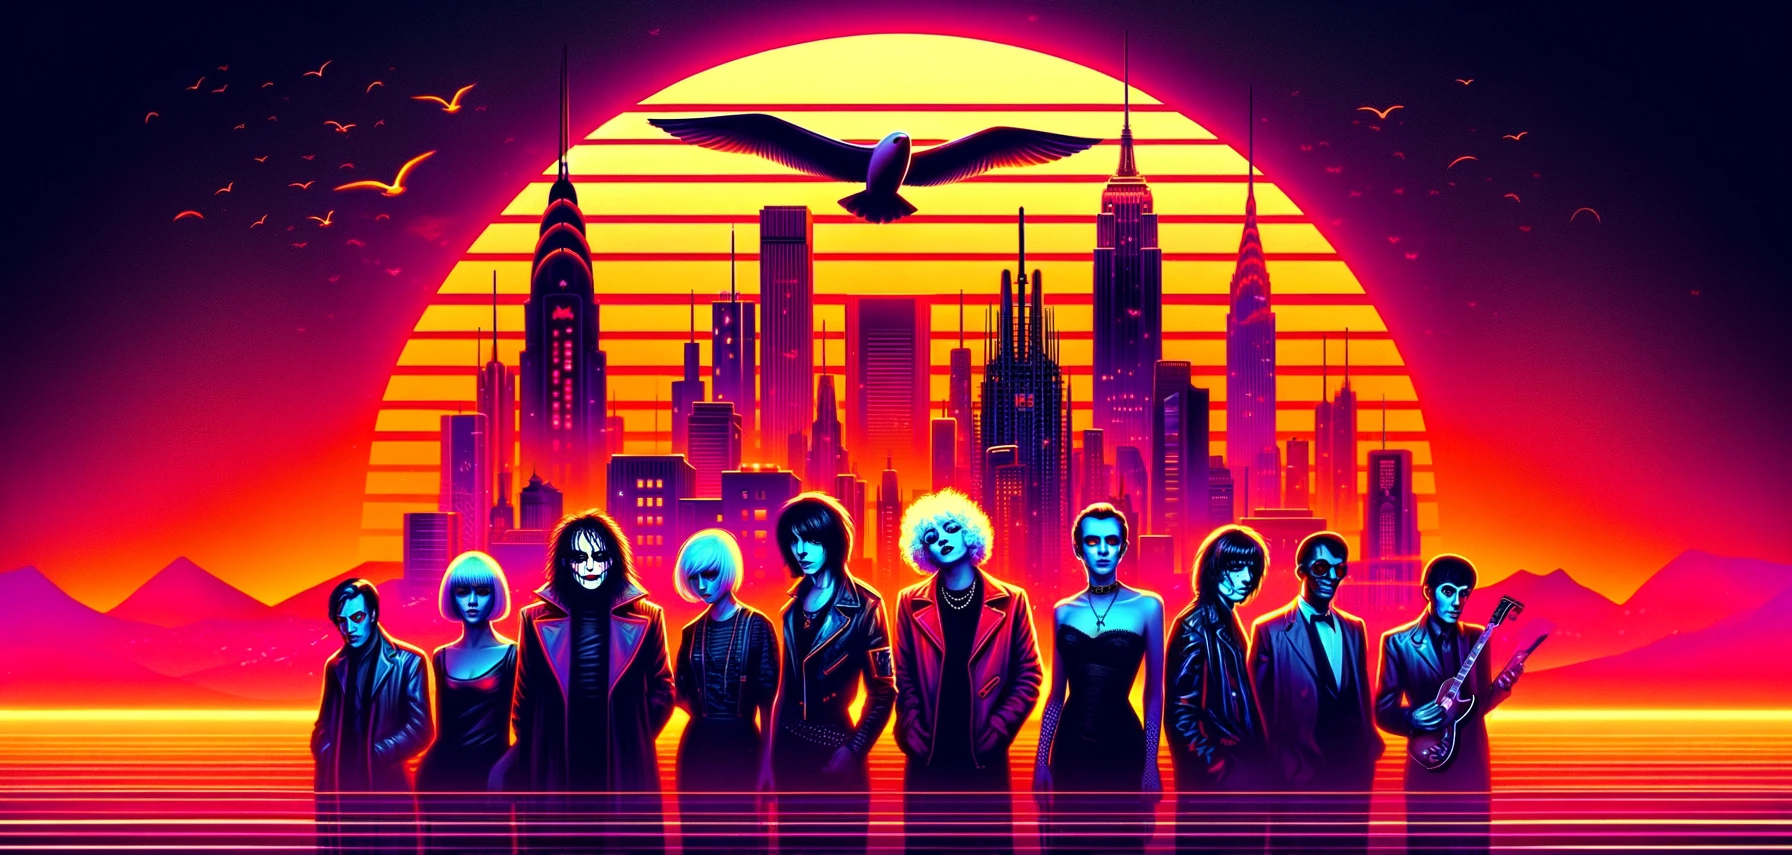 A retro-futurism/synthwave skyline backdrop with warm neon colors. In the foreground, evoke the vibe of various music artists and genres discussed in the blog post: Paula Abdul, Bing Crosby, The Who, Flock of Seagulls, Nirvana, Metallica, The Clash, Marilyn Manson, and Skinny Puppy. The overall aesthetic should have gothic undertones, featuring elements like dark clothing, mysterious shadows, and a slightly eerie atmosphere to capture the eclectic and diverse music tastes described. Image generated by DALL-E